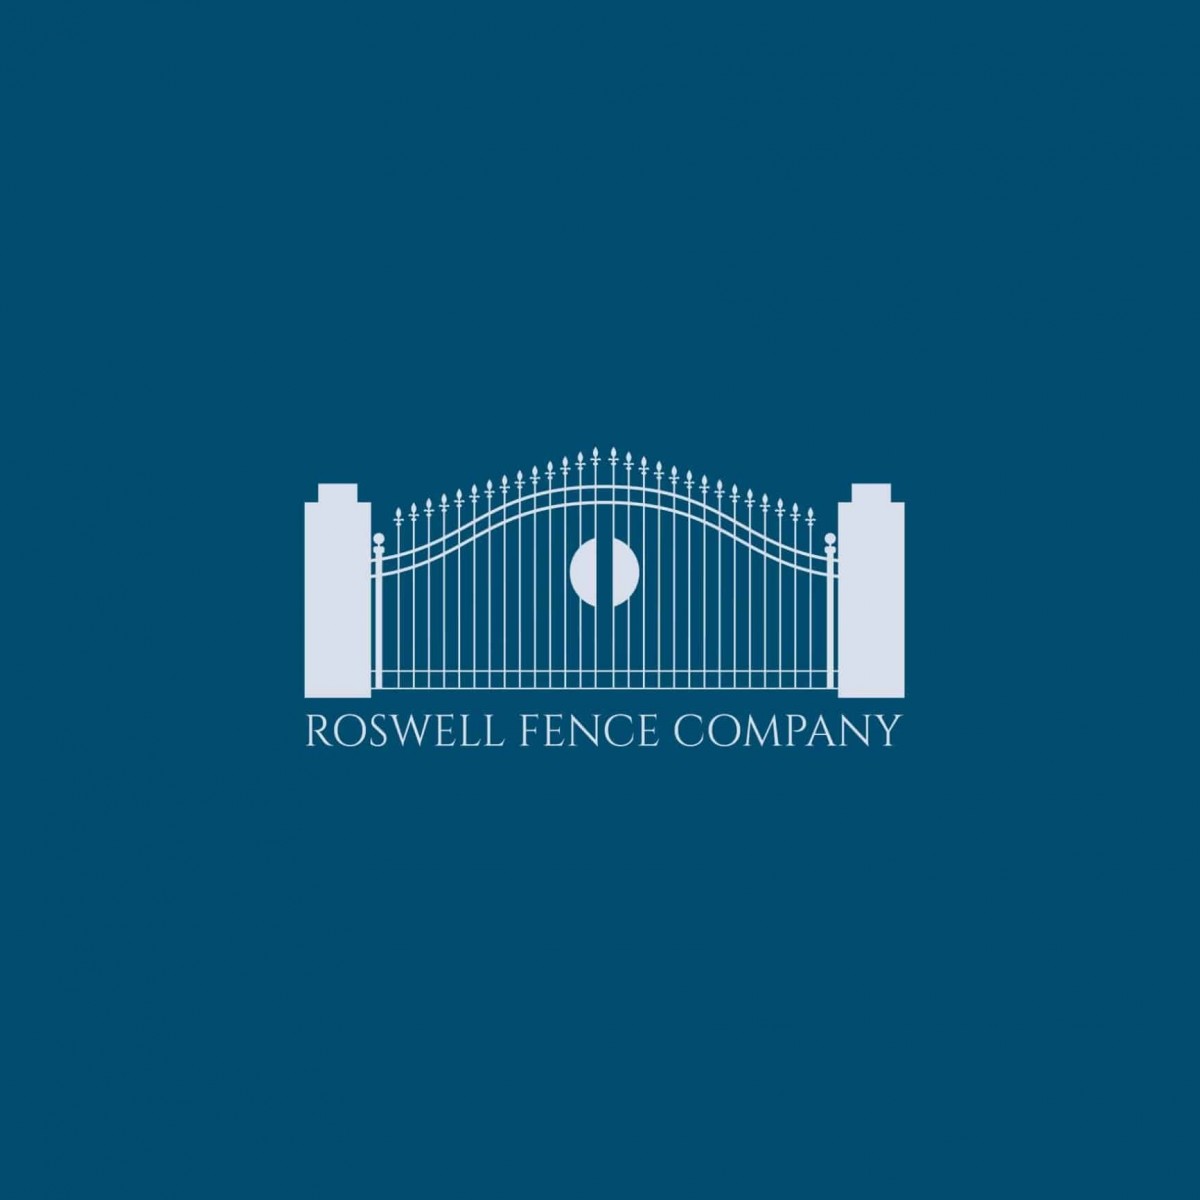 Roswell Fence Company